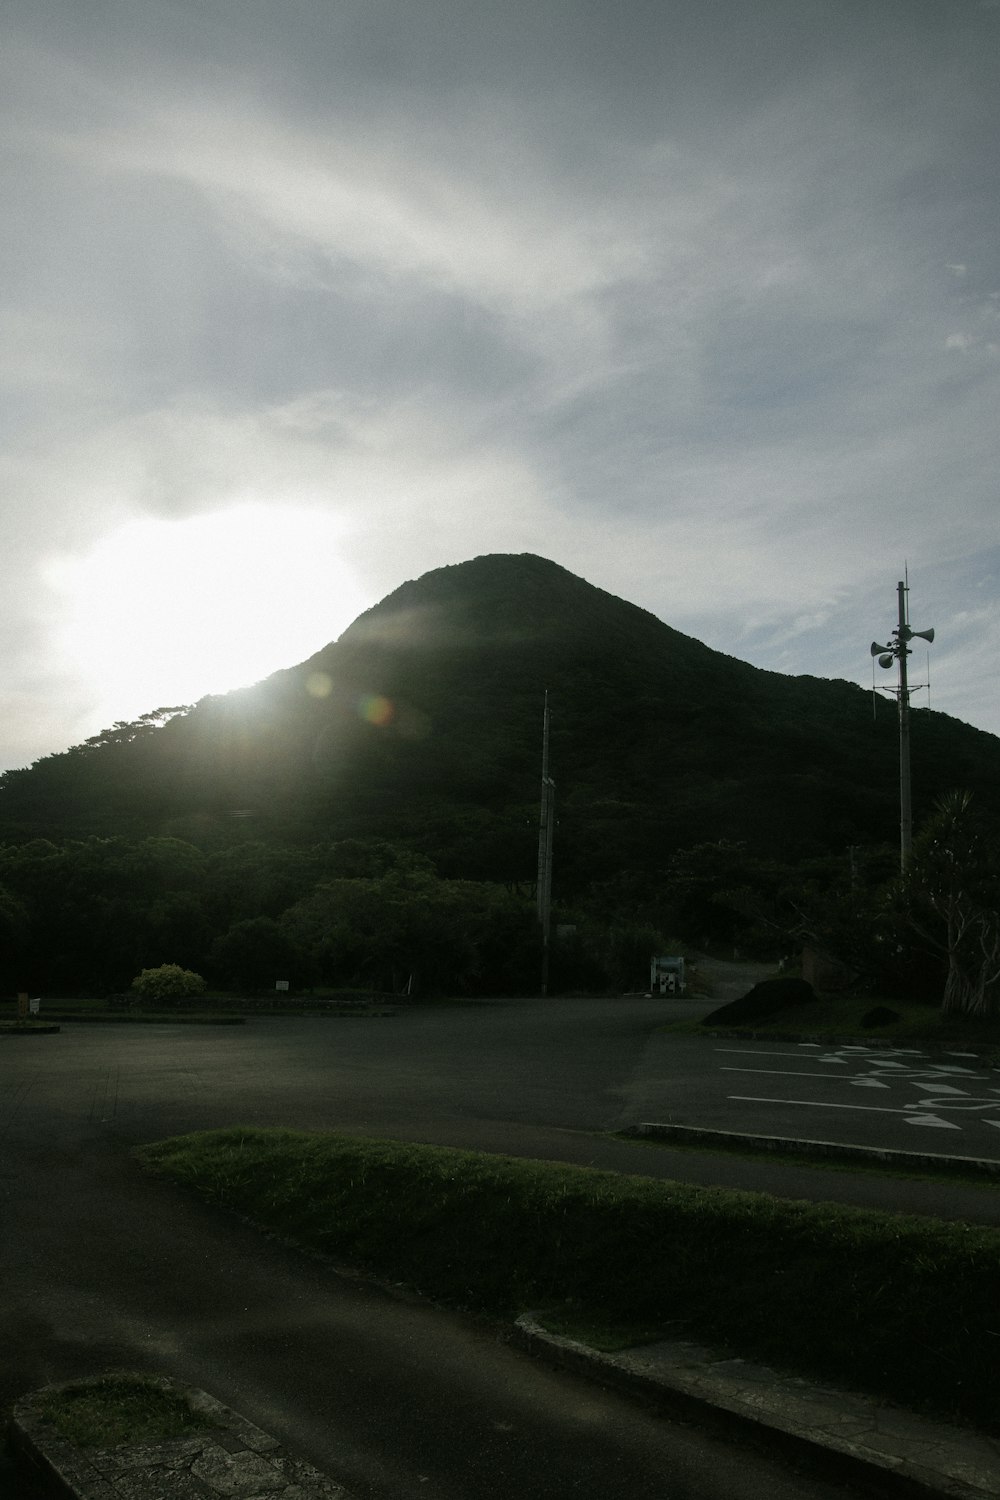 the sun is setting behind a mountain